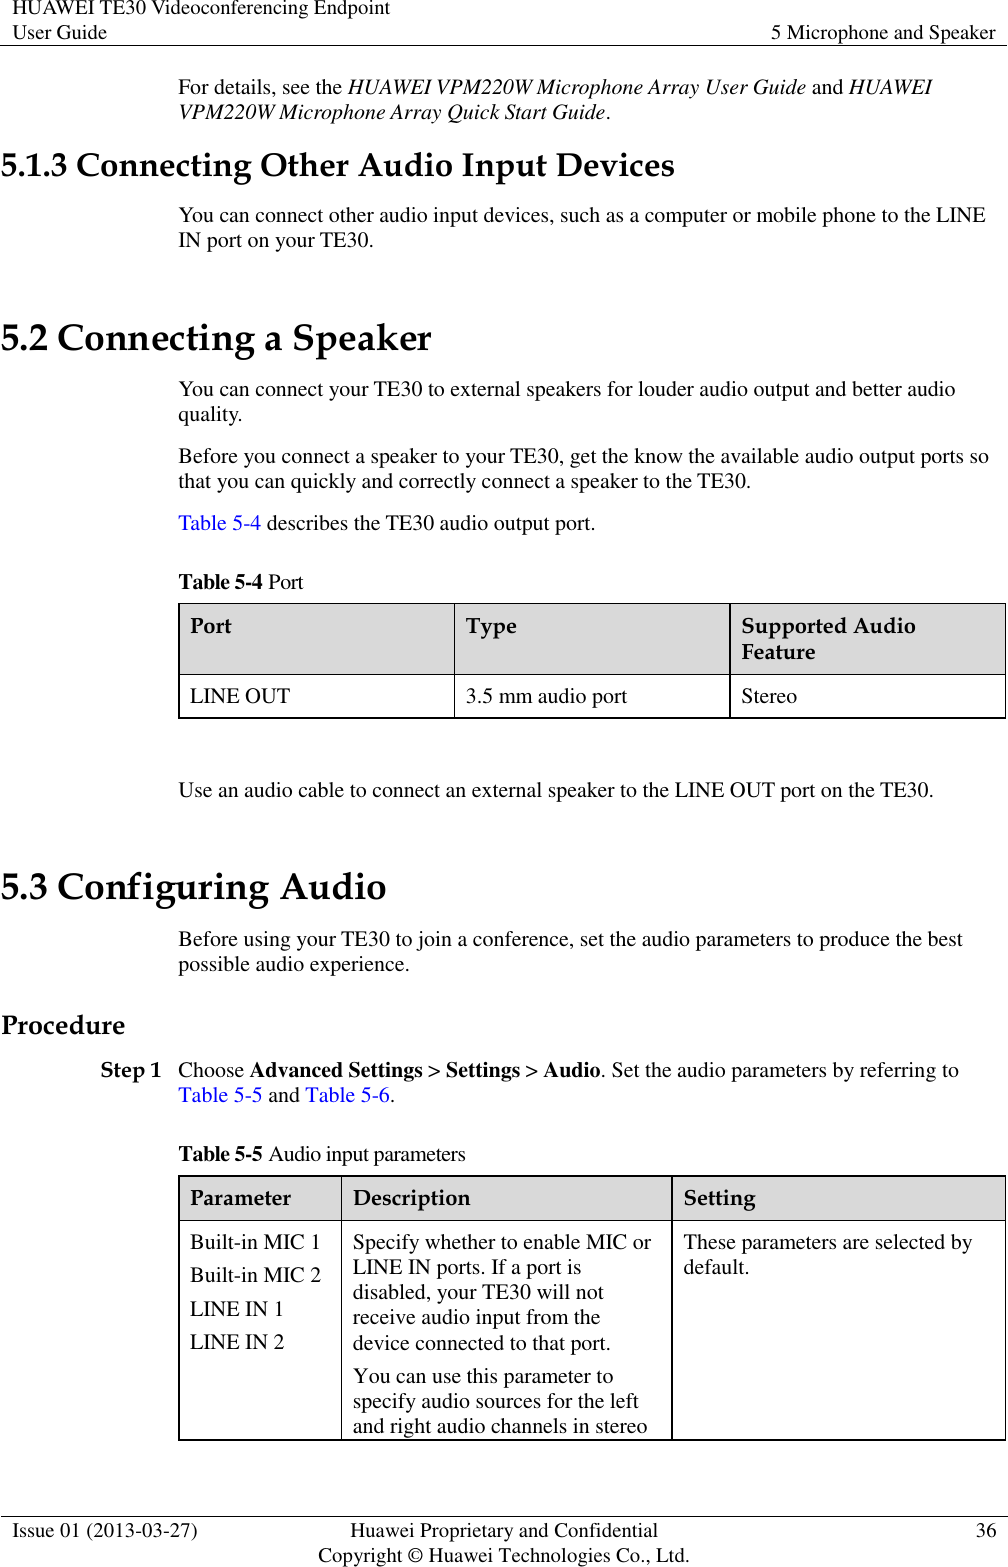 HUAWEI TE30 Videoconferencing Endpoint User Guide 5 Microphone and Speaker  Issue 01 (2013-03-27) Huawei Proprietary and Confidential                                     Copyright © Huawei Technologies Co., Ltd. 36  For details, see the HUAWEI VPM220W Microphone Array User Guide and HUAWEI VPM220W Microphone Array Quick Start Guide. 5.1.3 Connecting Other Audio Input Devices You can connect other audio input devices, such as a computer or mobile phone to the LINE IN port on your TE30. 5.2 Connecting a Speaker You can connect your TE30 to external speakers for louder audio output and better audio quality. Before you connect a speaker to your TE30, get the know the available audio output ports so that you can quickly and correctly connect a speaker to the TE30. Table 5-4 describes the TE30 audio output port. Table 5-4 Port Port Type Supported Audio Feature LINE OUT 3.5 mm audio port Stereo  Use an audio cable to connect an external speaker to the LINE OUT port on the TE30.   5.3 Configuring Audio Before using your TE30 to join a conference, set the audio parameters to produce the best possible audio experience. Procedure Step 1 Choose Advanced Settings &gt; Settings &gt; Audio. Set the audio parameters by referring to Table 5-5 and Table 5-6. Table 5-5 Audio input parameters Parameter Description Setting Built-in MIC 1 Built-in MIC 2 LINE IN 1 LINE IN 2 Specify whether to enable MIC or LINE IN ports. If a port is disabled, your TE30 will not receive audio input from the device connected to that port.   You can use this parameter to specify audio sources for the left and right audio channels in stereo These parameters are selected by default. 